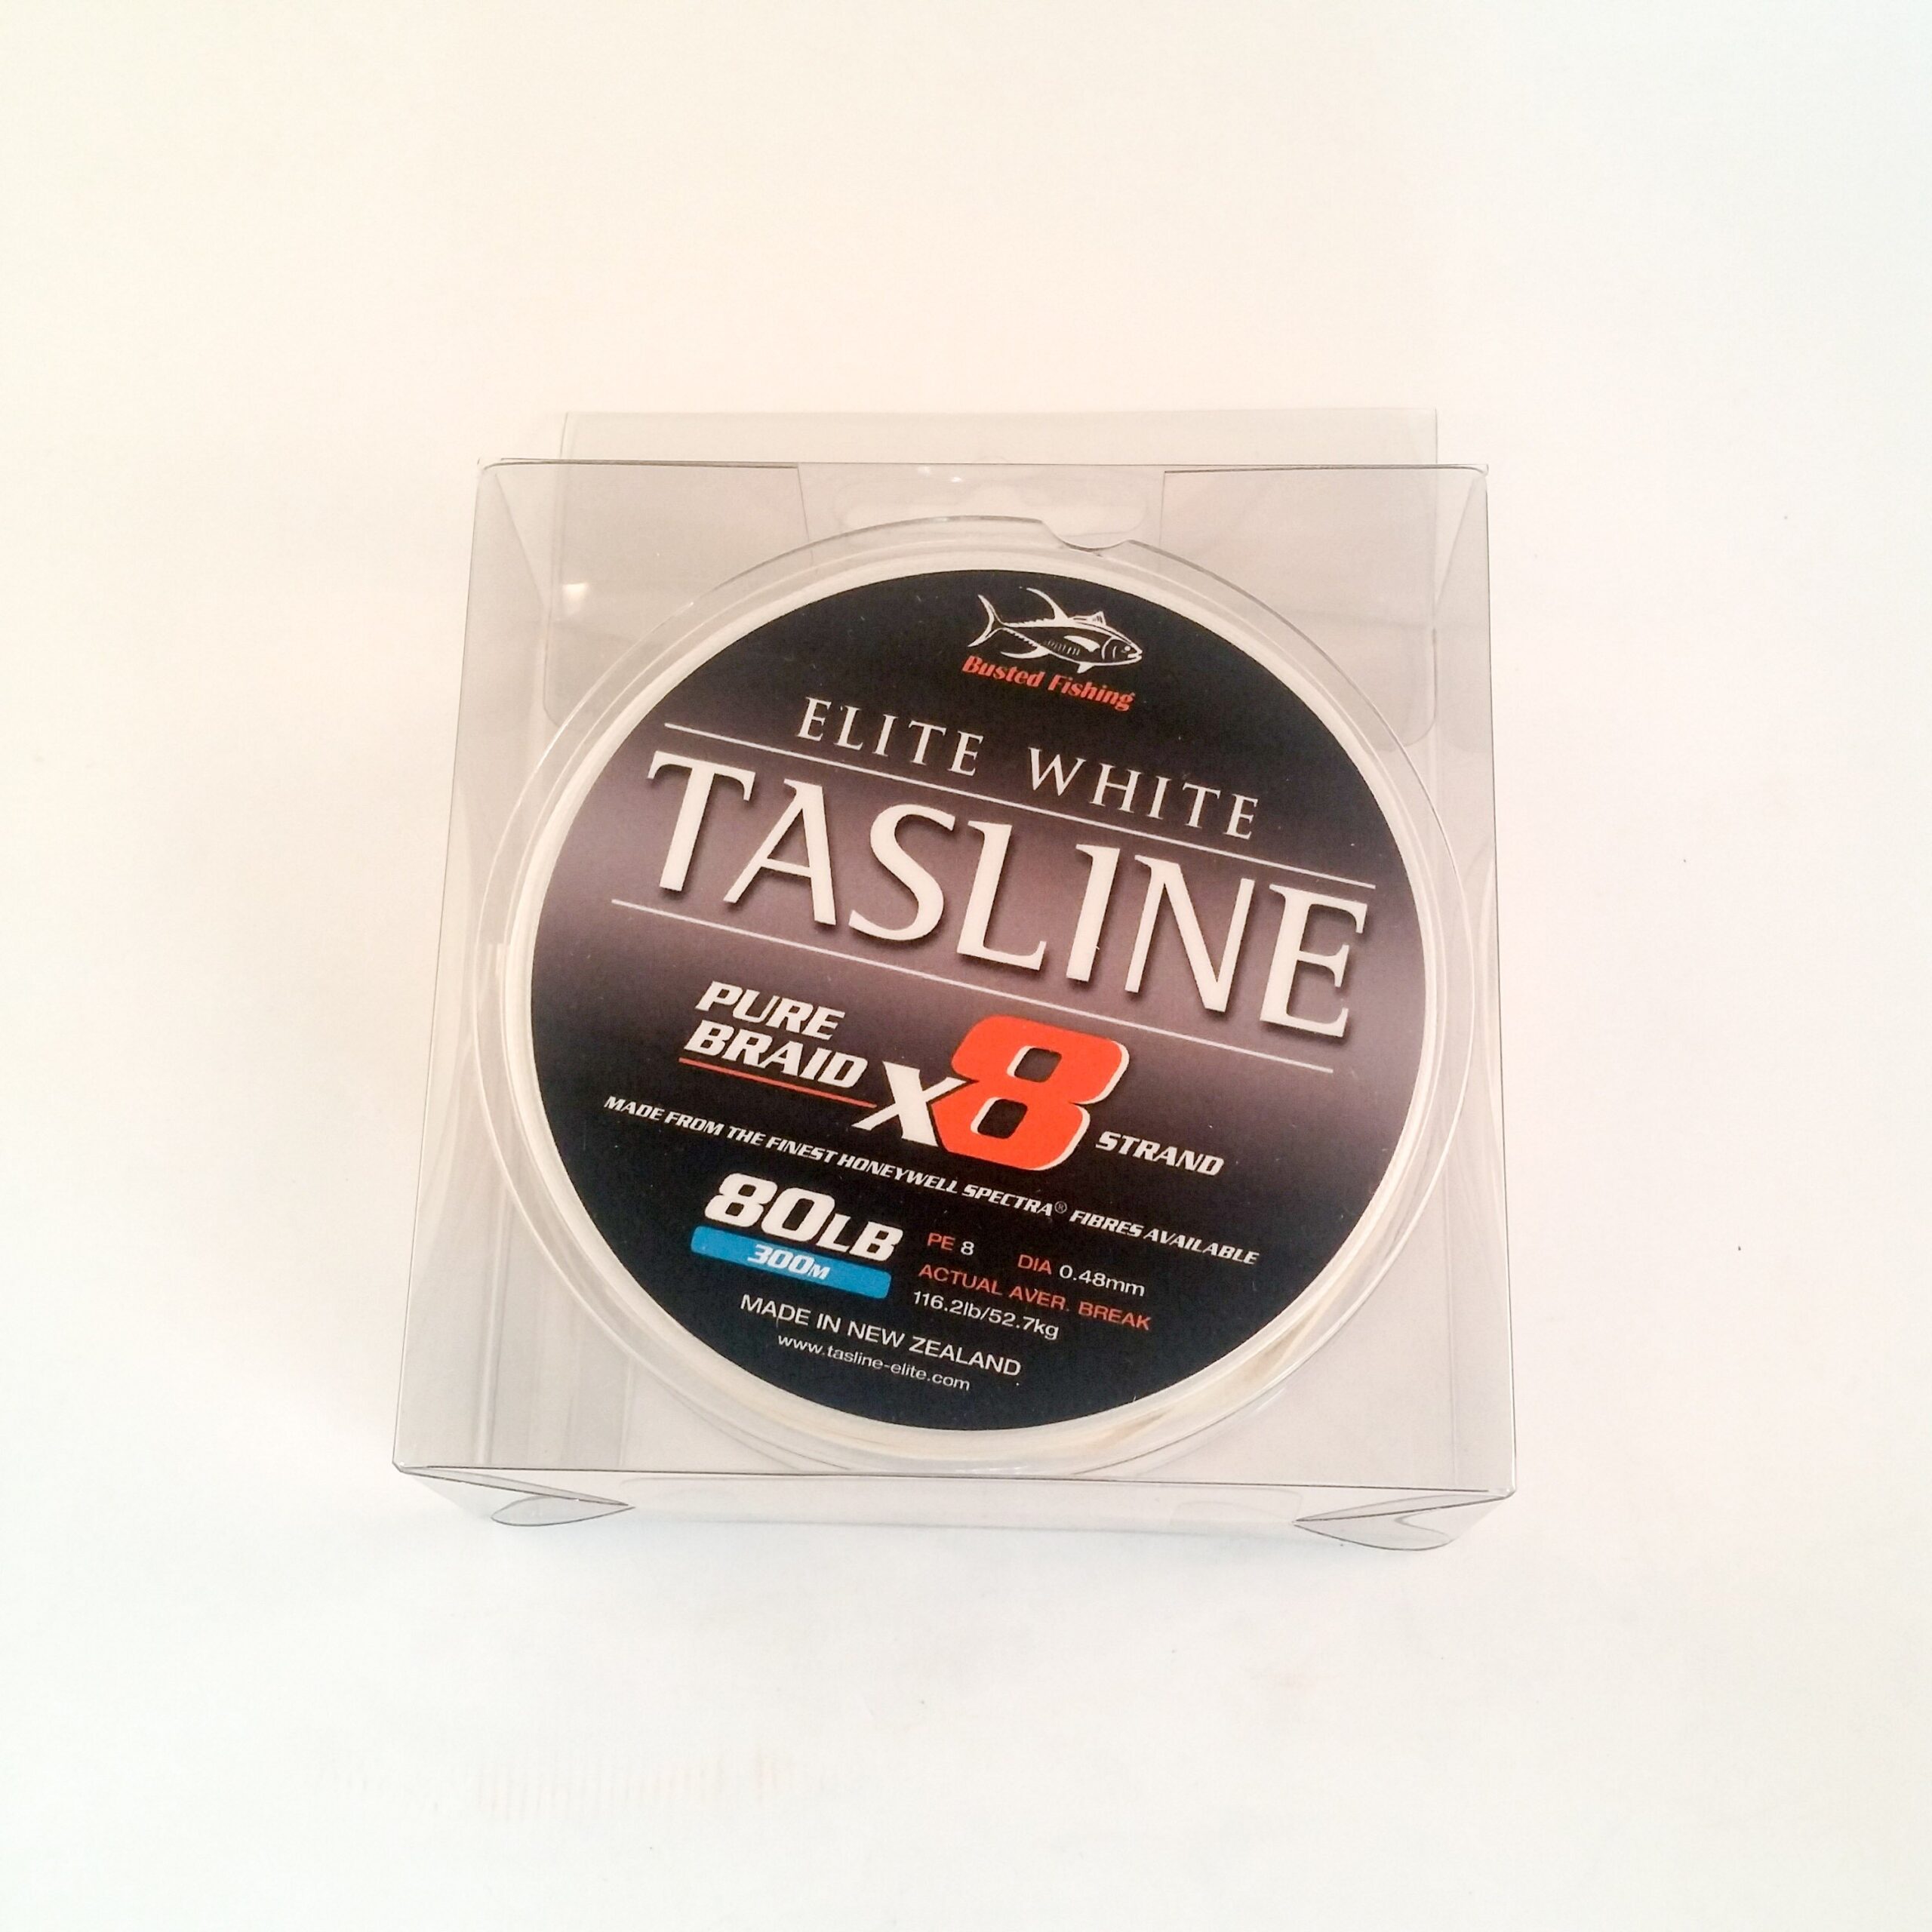 Mario's Fresh Bait - BY POPULAR DEMAND TASLINE Elite White Braid made in  NZ is now available In store. We are stocking 150m, 300m and bulk spools  ready for our free in-house